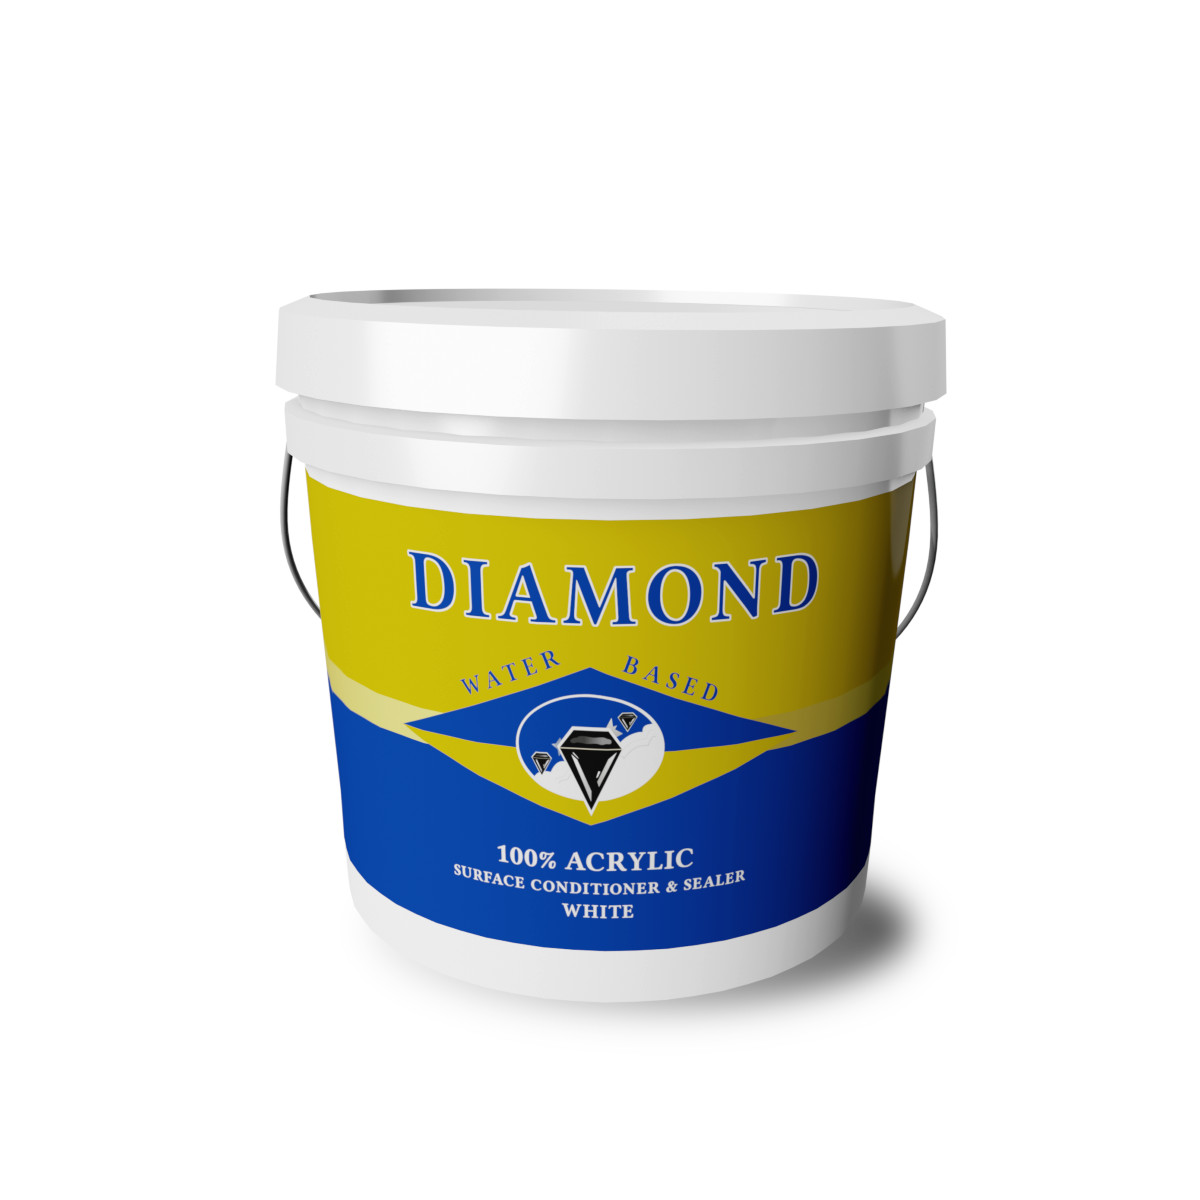 Diamond Surface Conditioner and Sealer